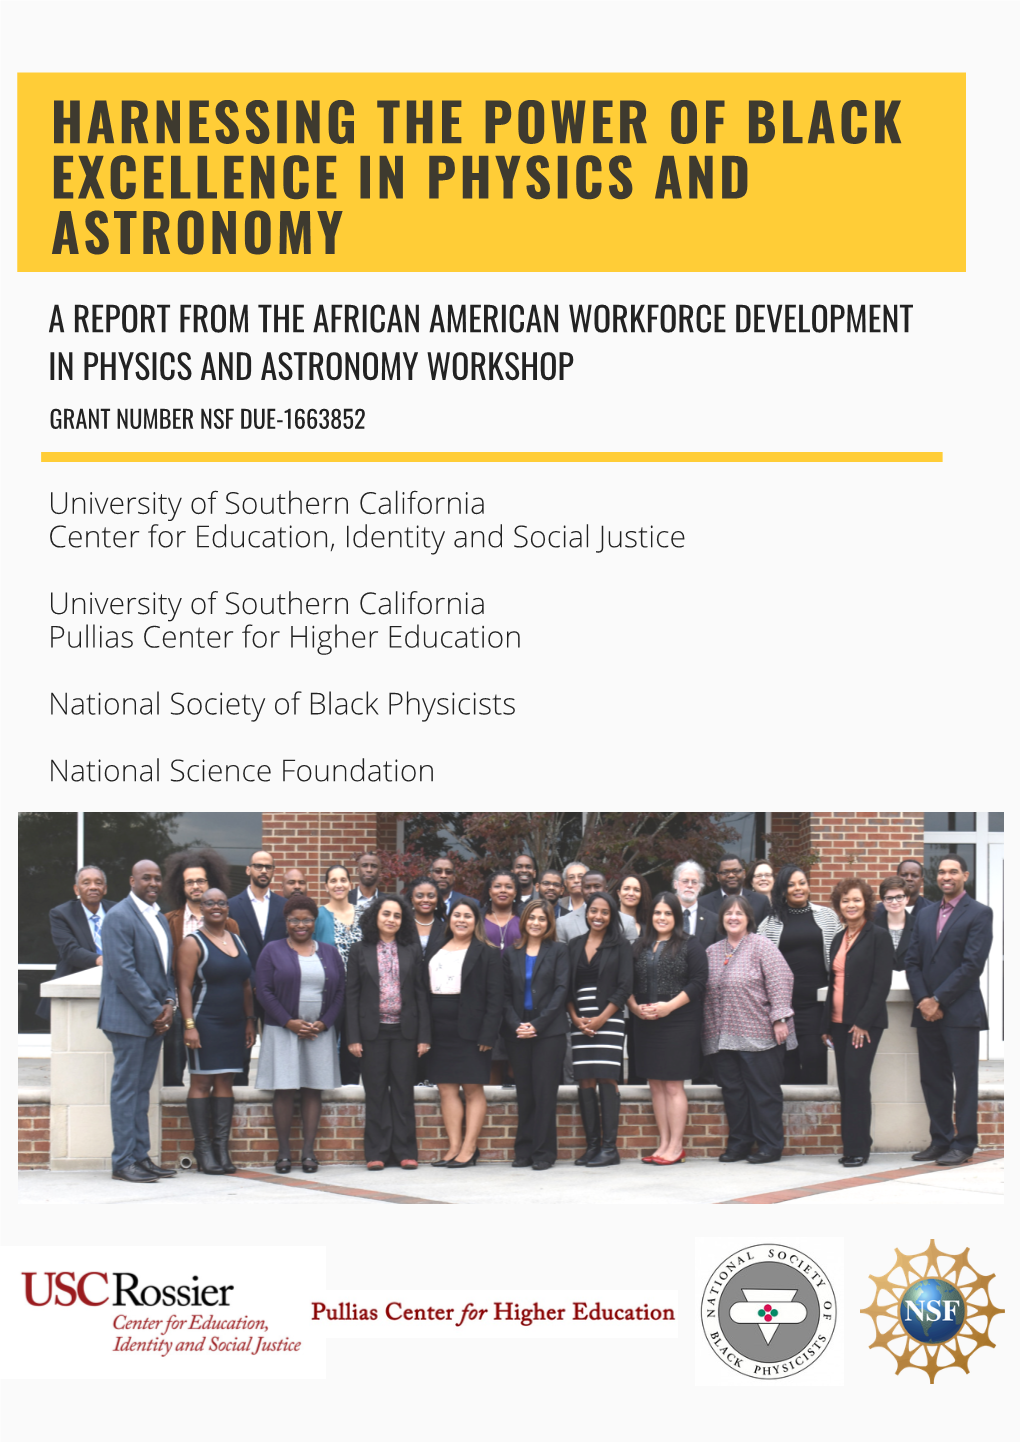 Harnessing the Power of Black Excellence in Physics and Astronomy